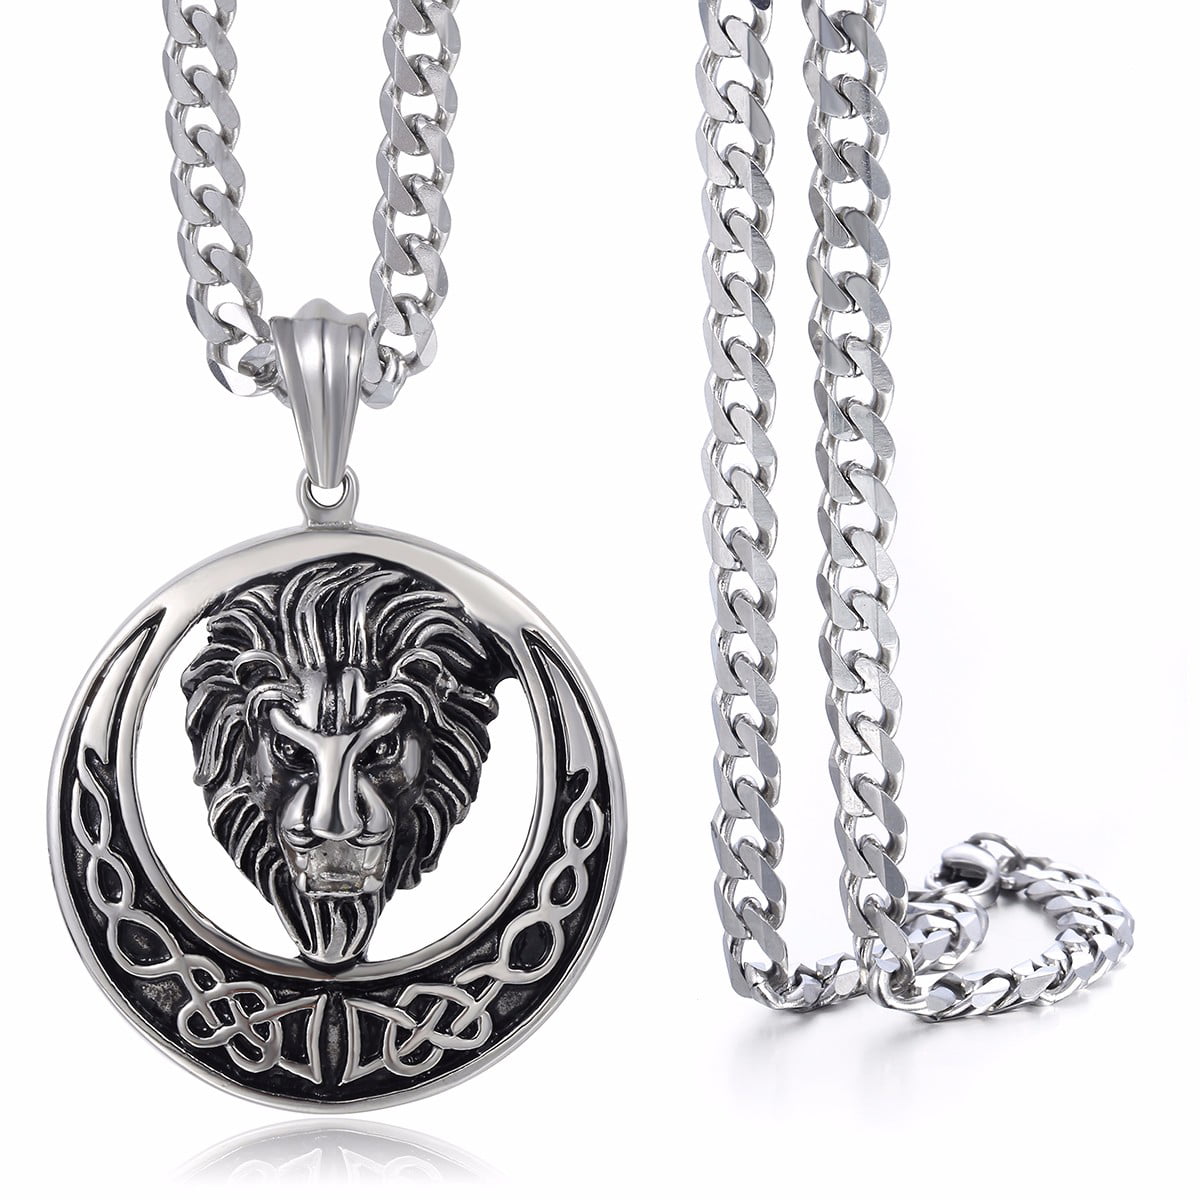 Diamond Framed Mini Medallion Pendant Stainless Steel Necklace with 24 Cuban Chain